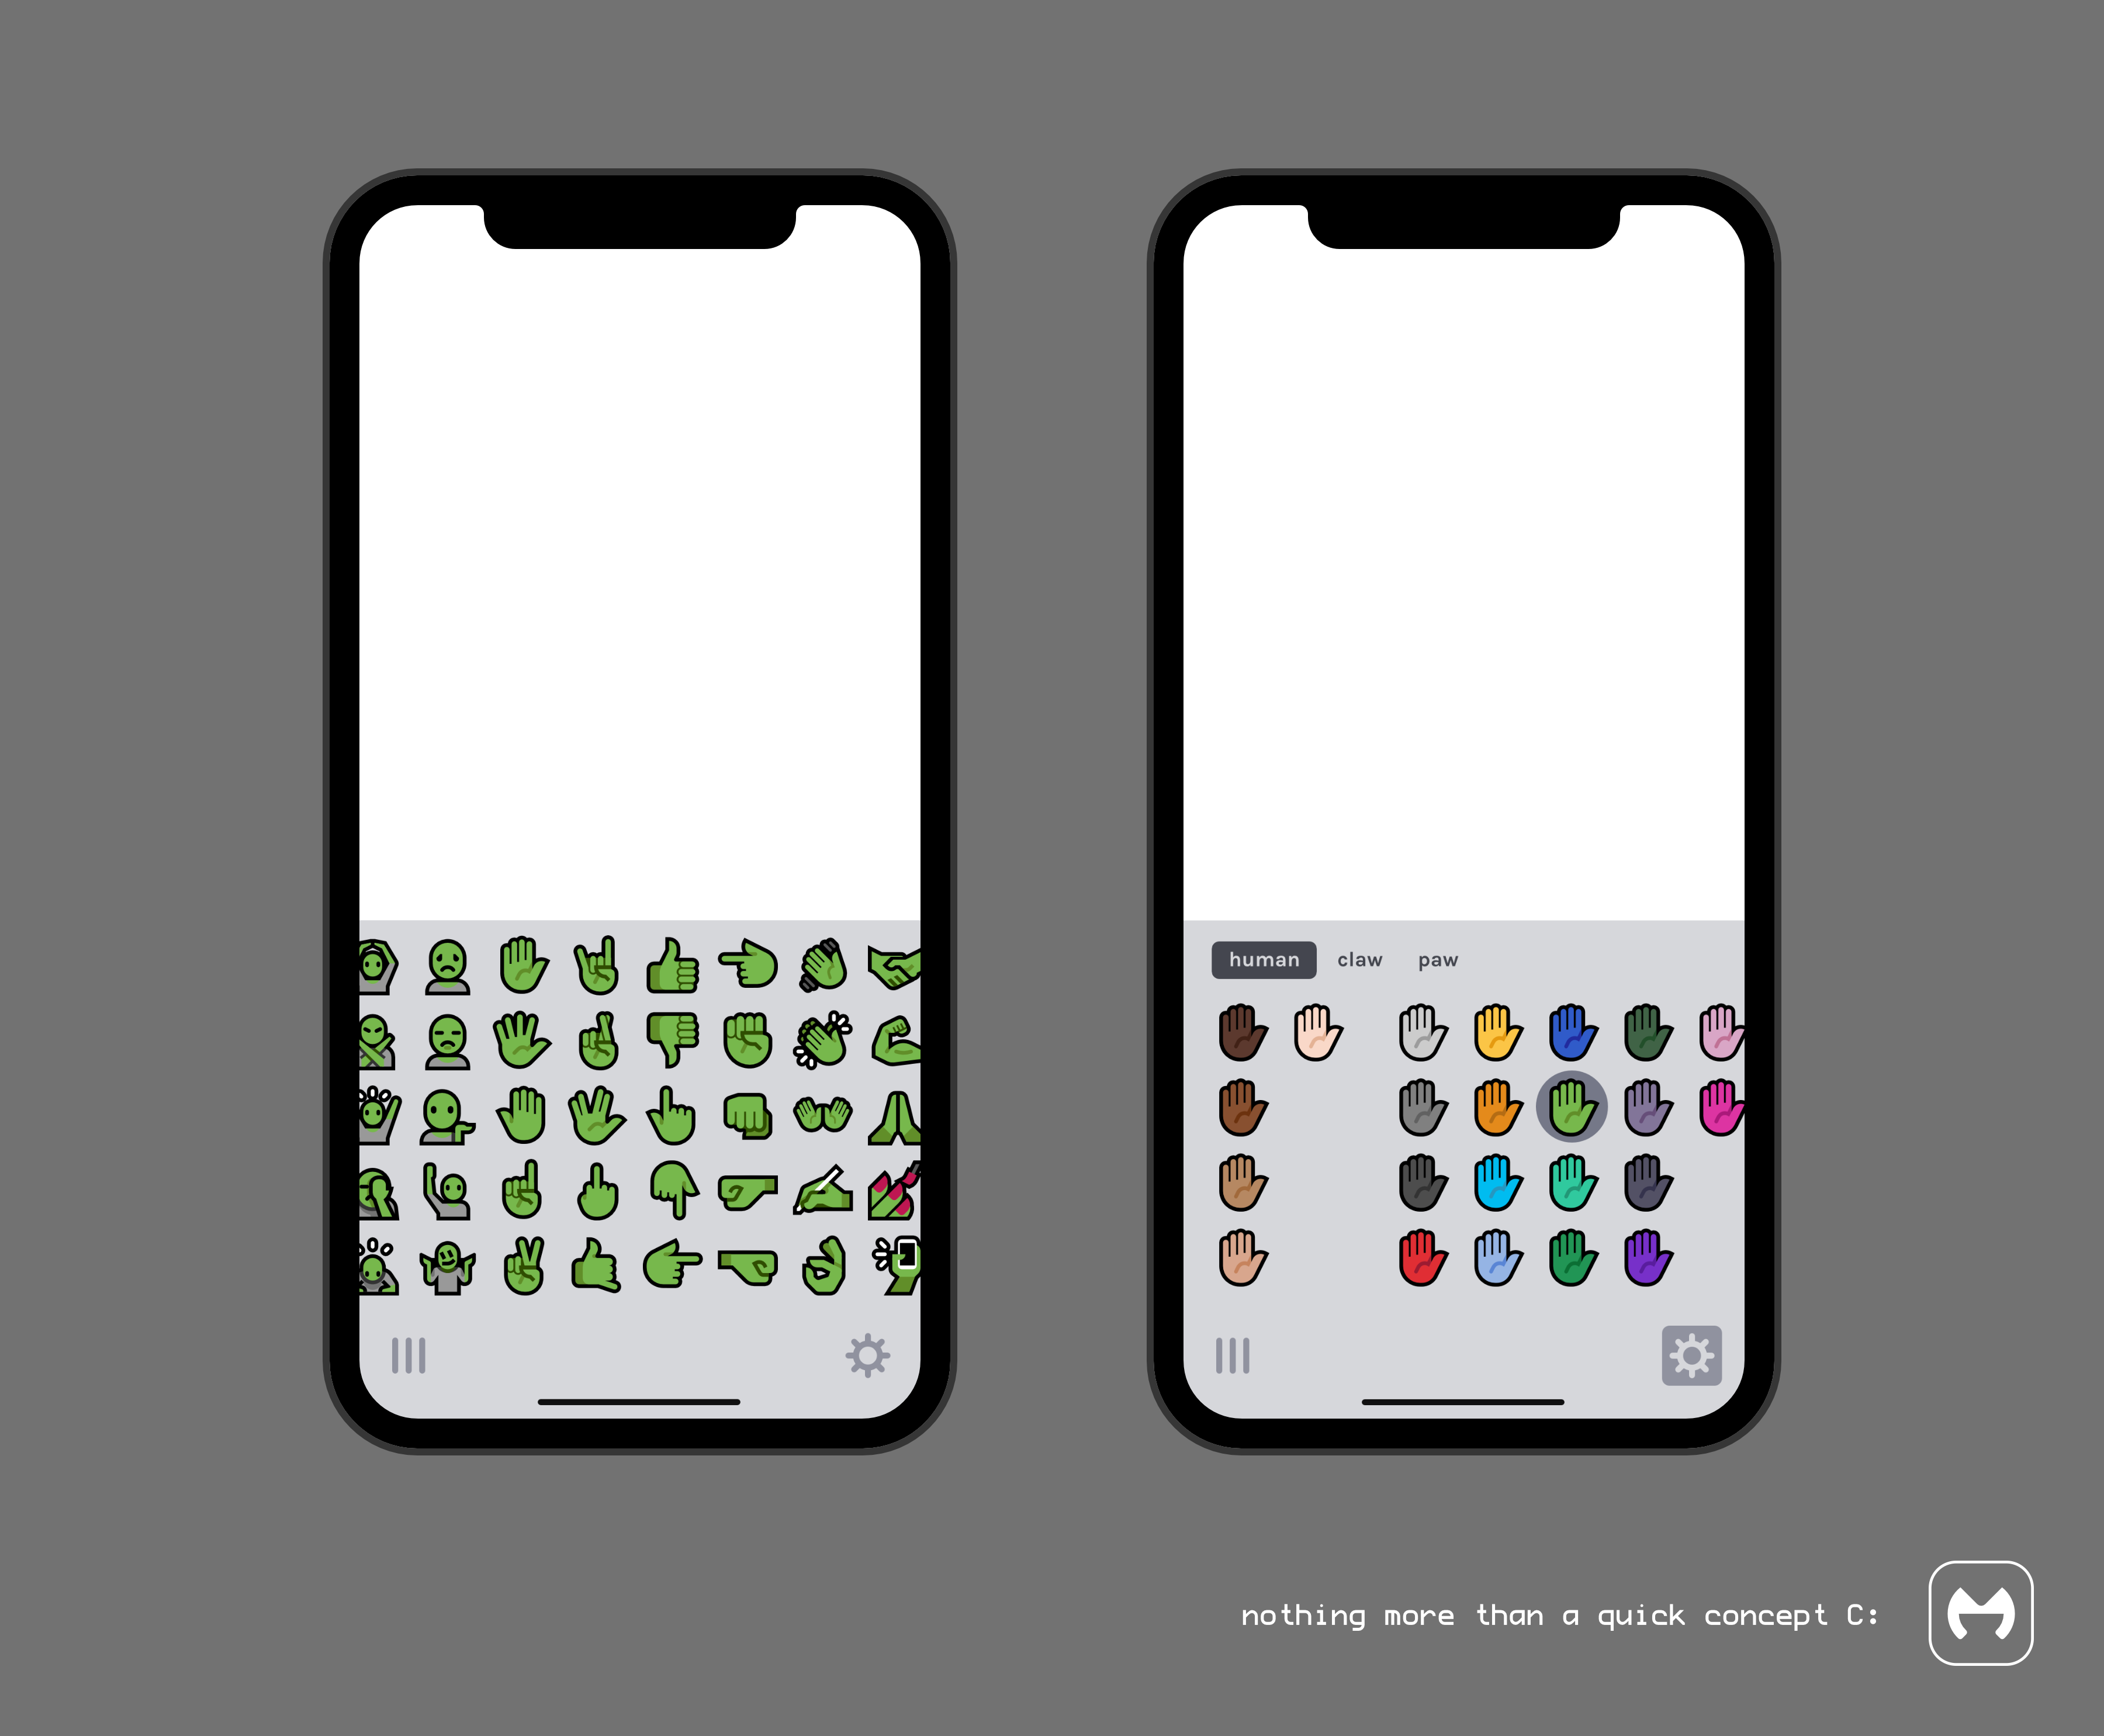 Concept of what a Mutant Standard keyboard could look like on an iPhone X.